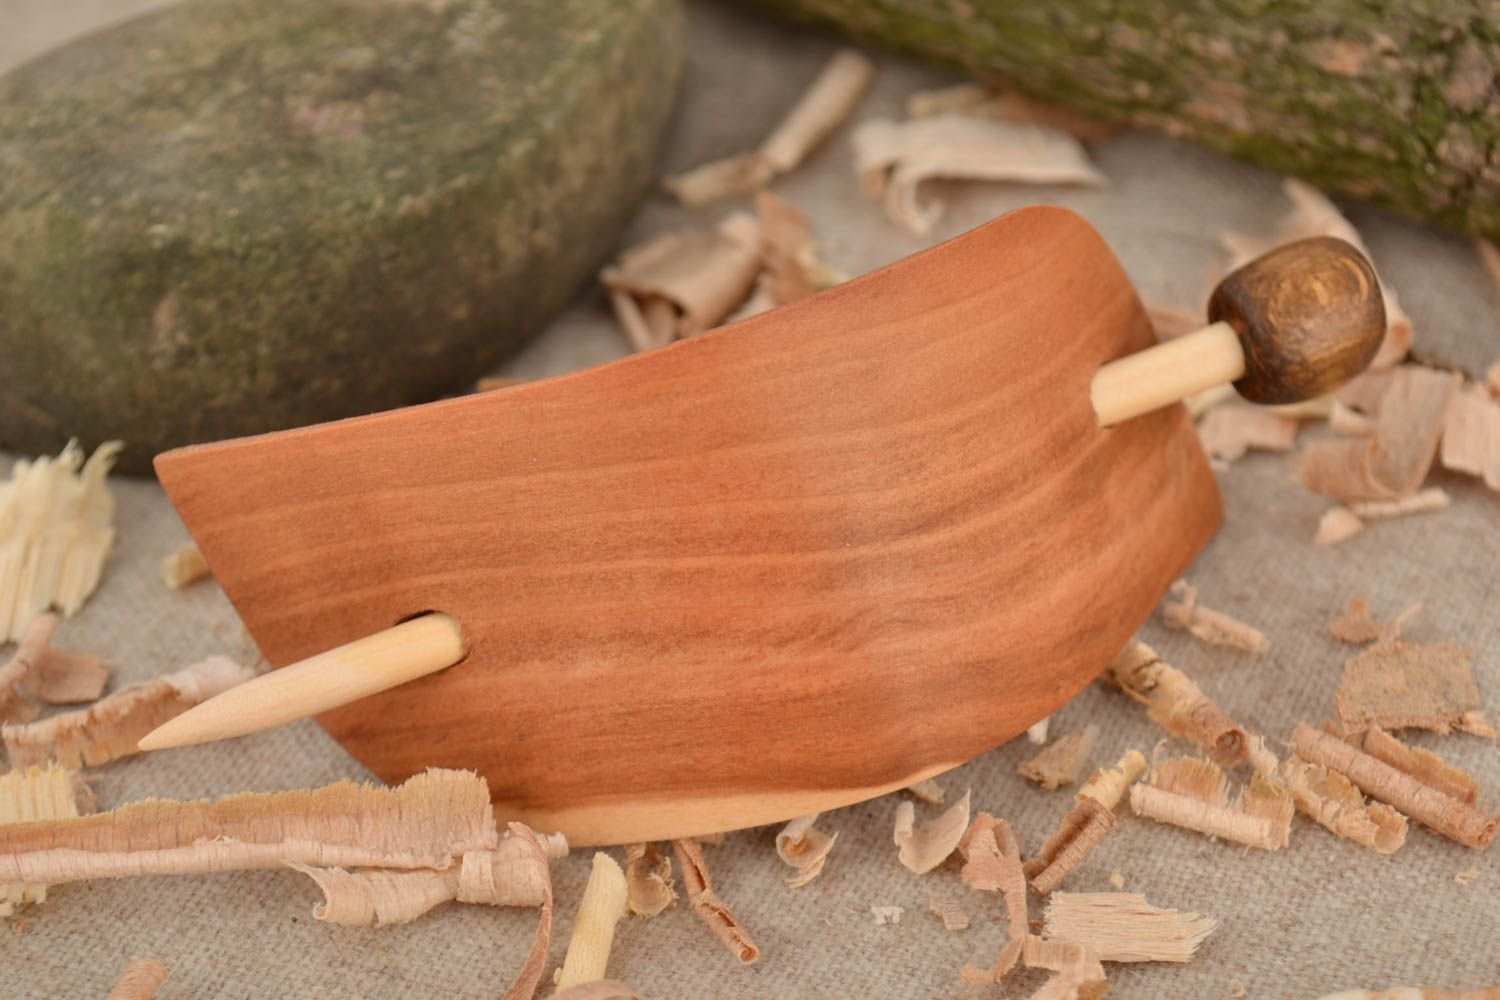 Eco friendly hair jewelry unusual wooden barrette hand made of natural material photo 1